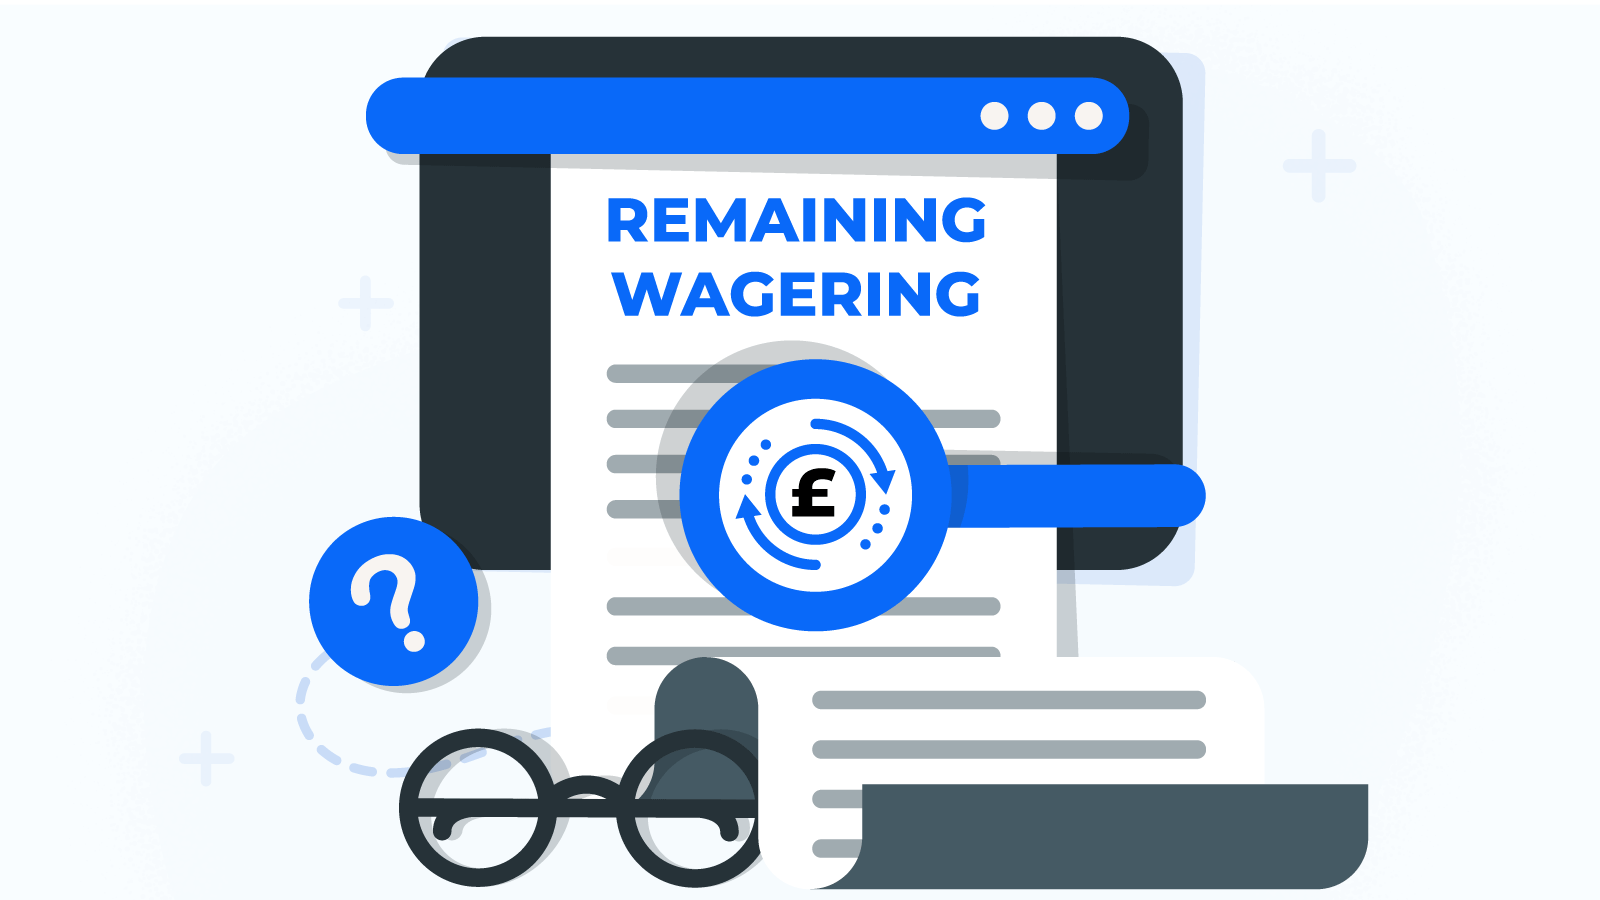 Where to see the remaining wagering